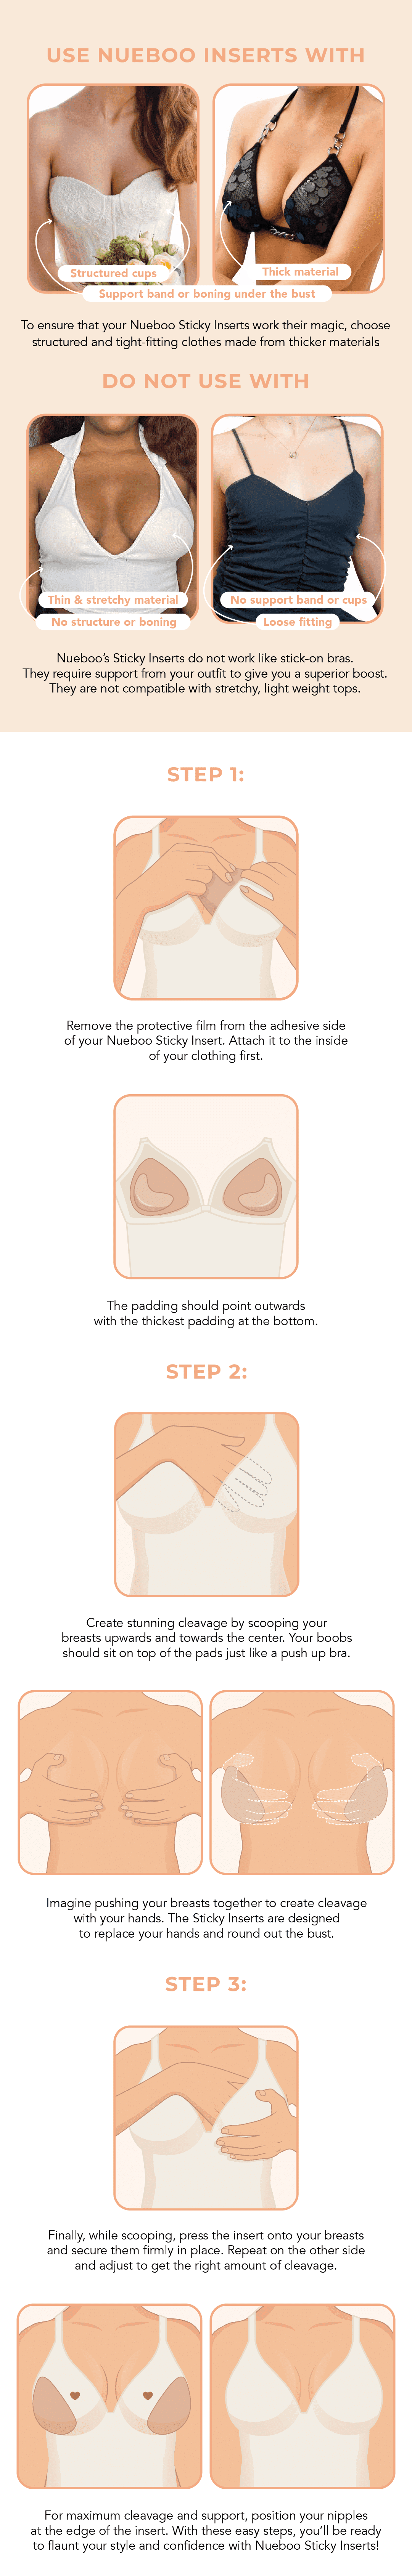 Bra Inserts, Nueboo Review